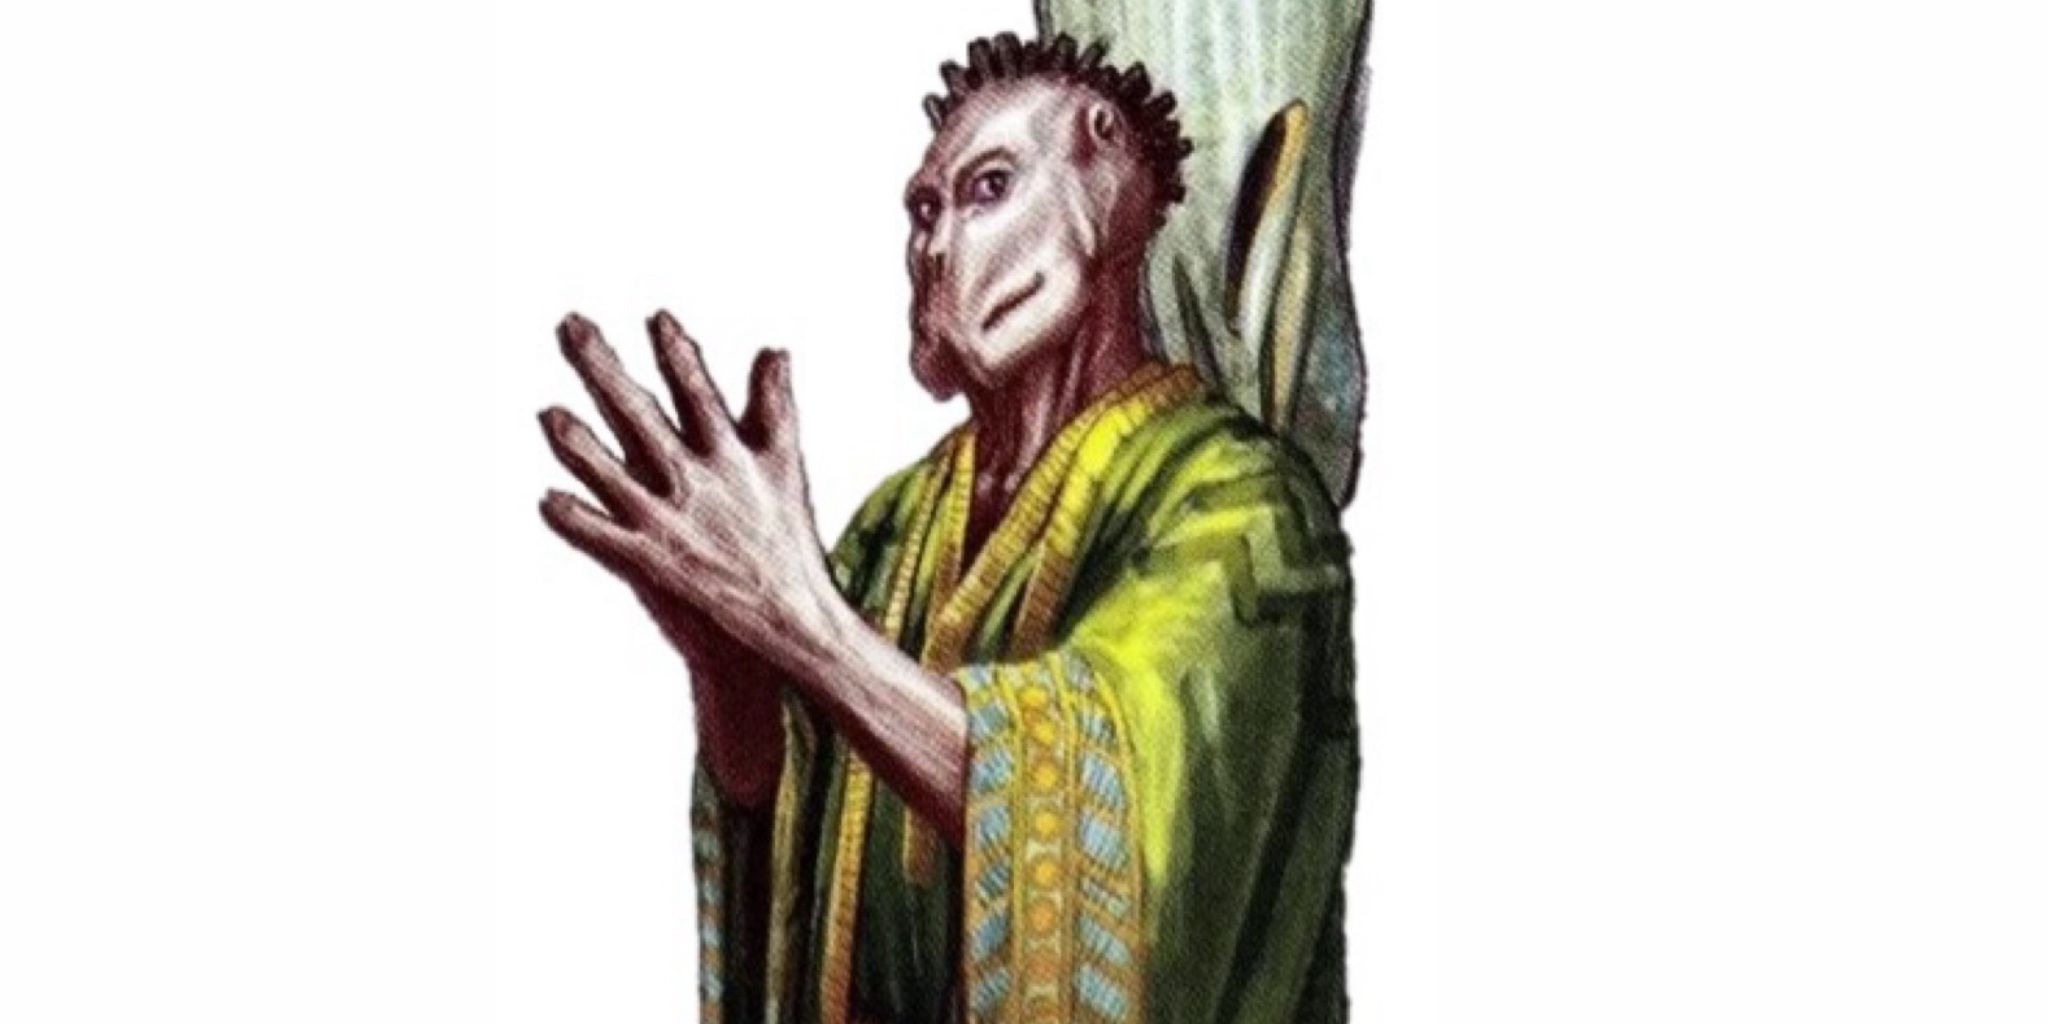 Vagaari as depicted in Star Wars Legends, wearing a sinister expression